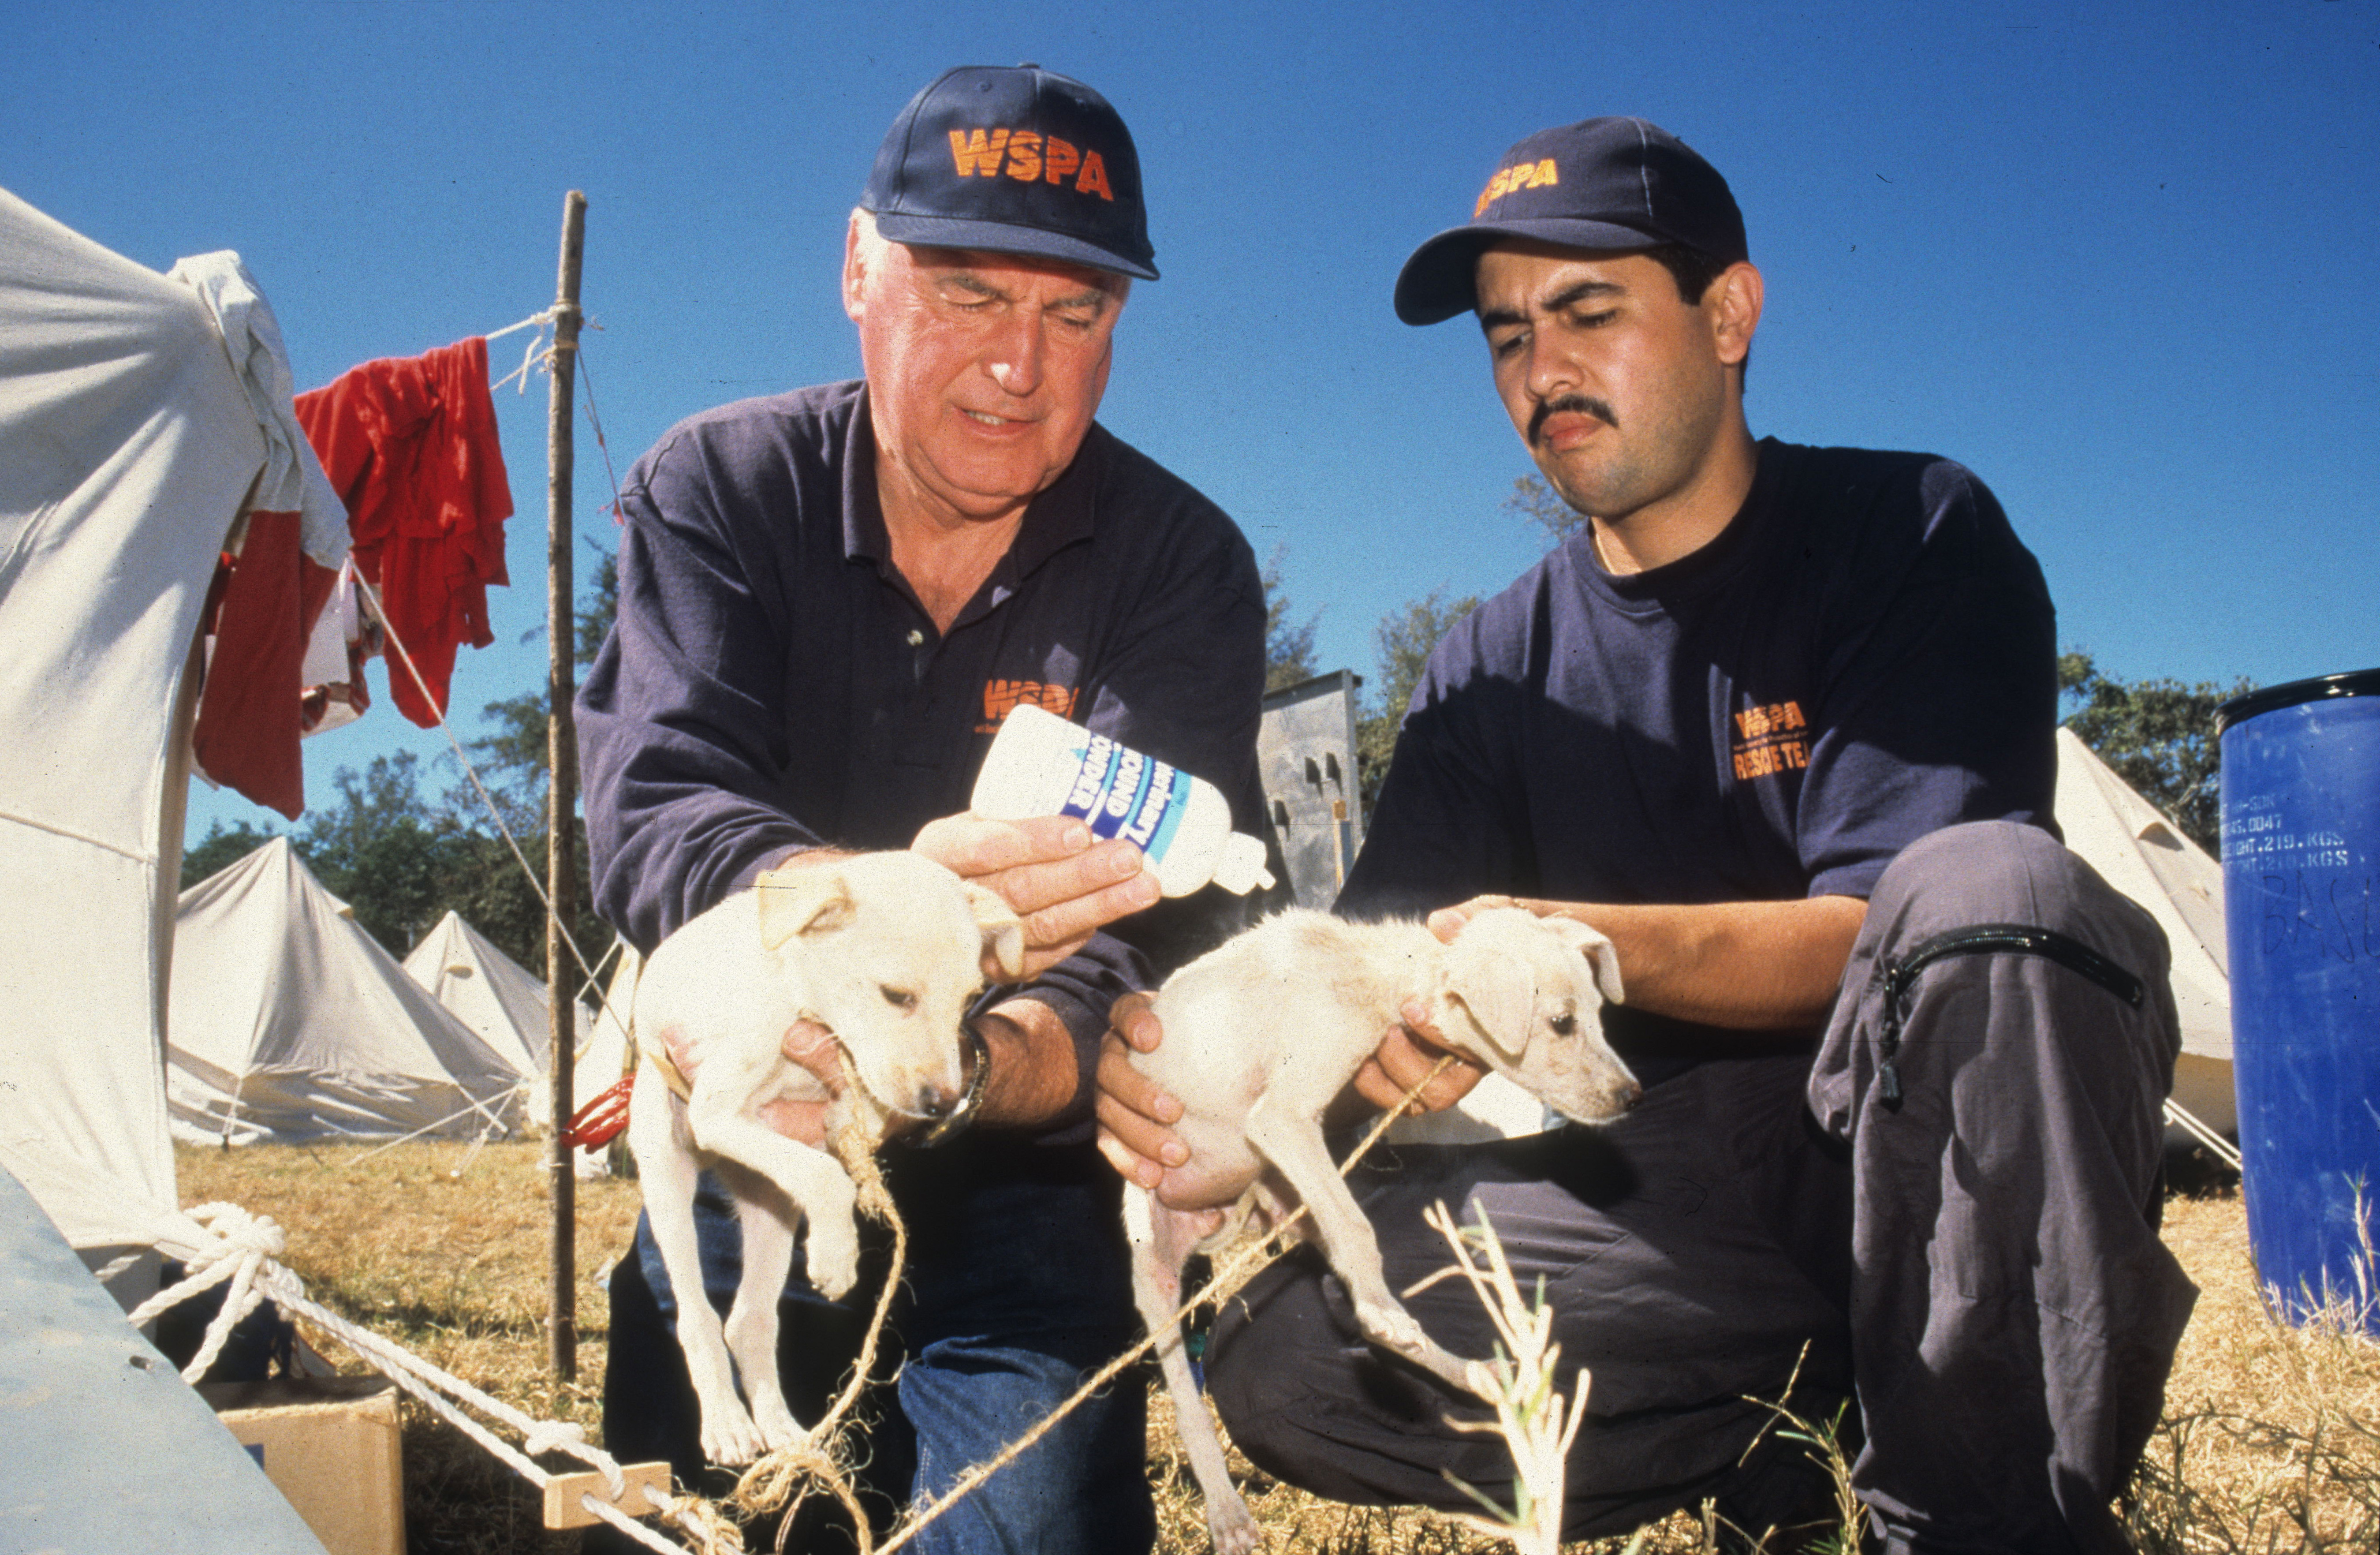 Our disaster relief team provides animal aid after an earthquake in El Salvador, 2001